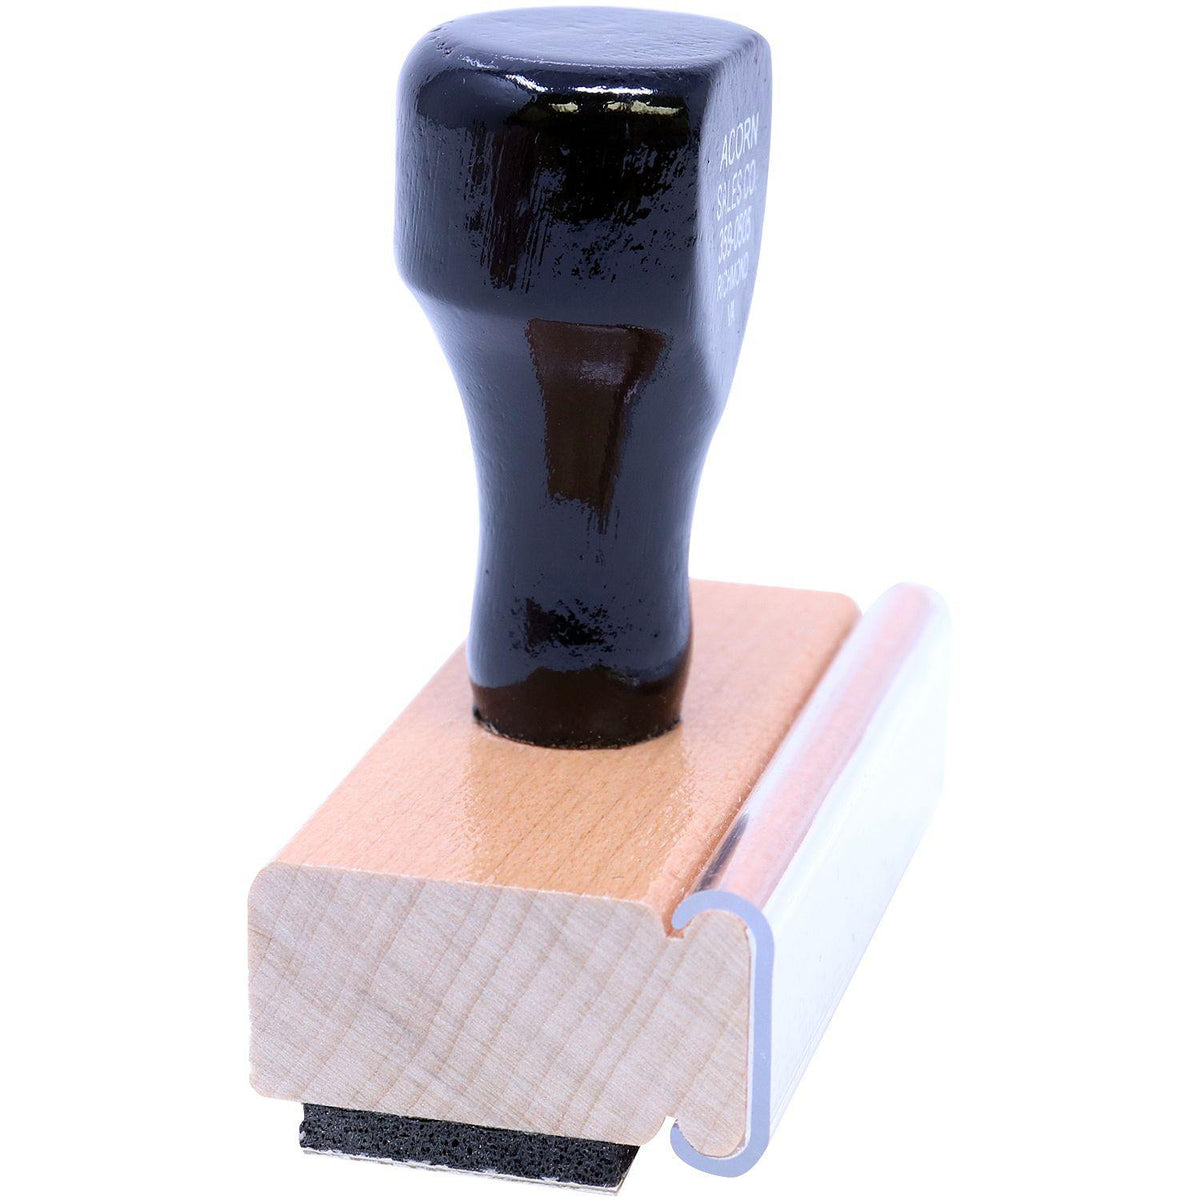 Side View of Large Have a Happy Day Rubber Stamp at an Angle